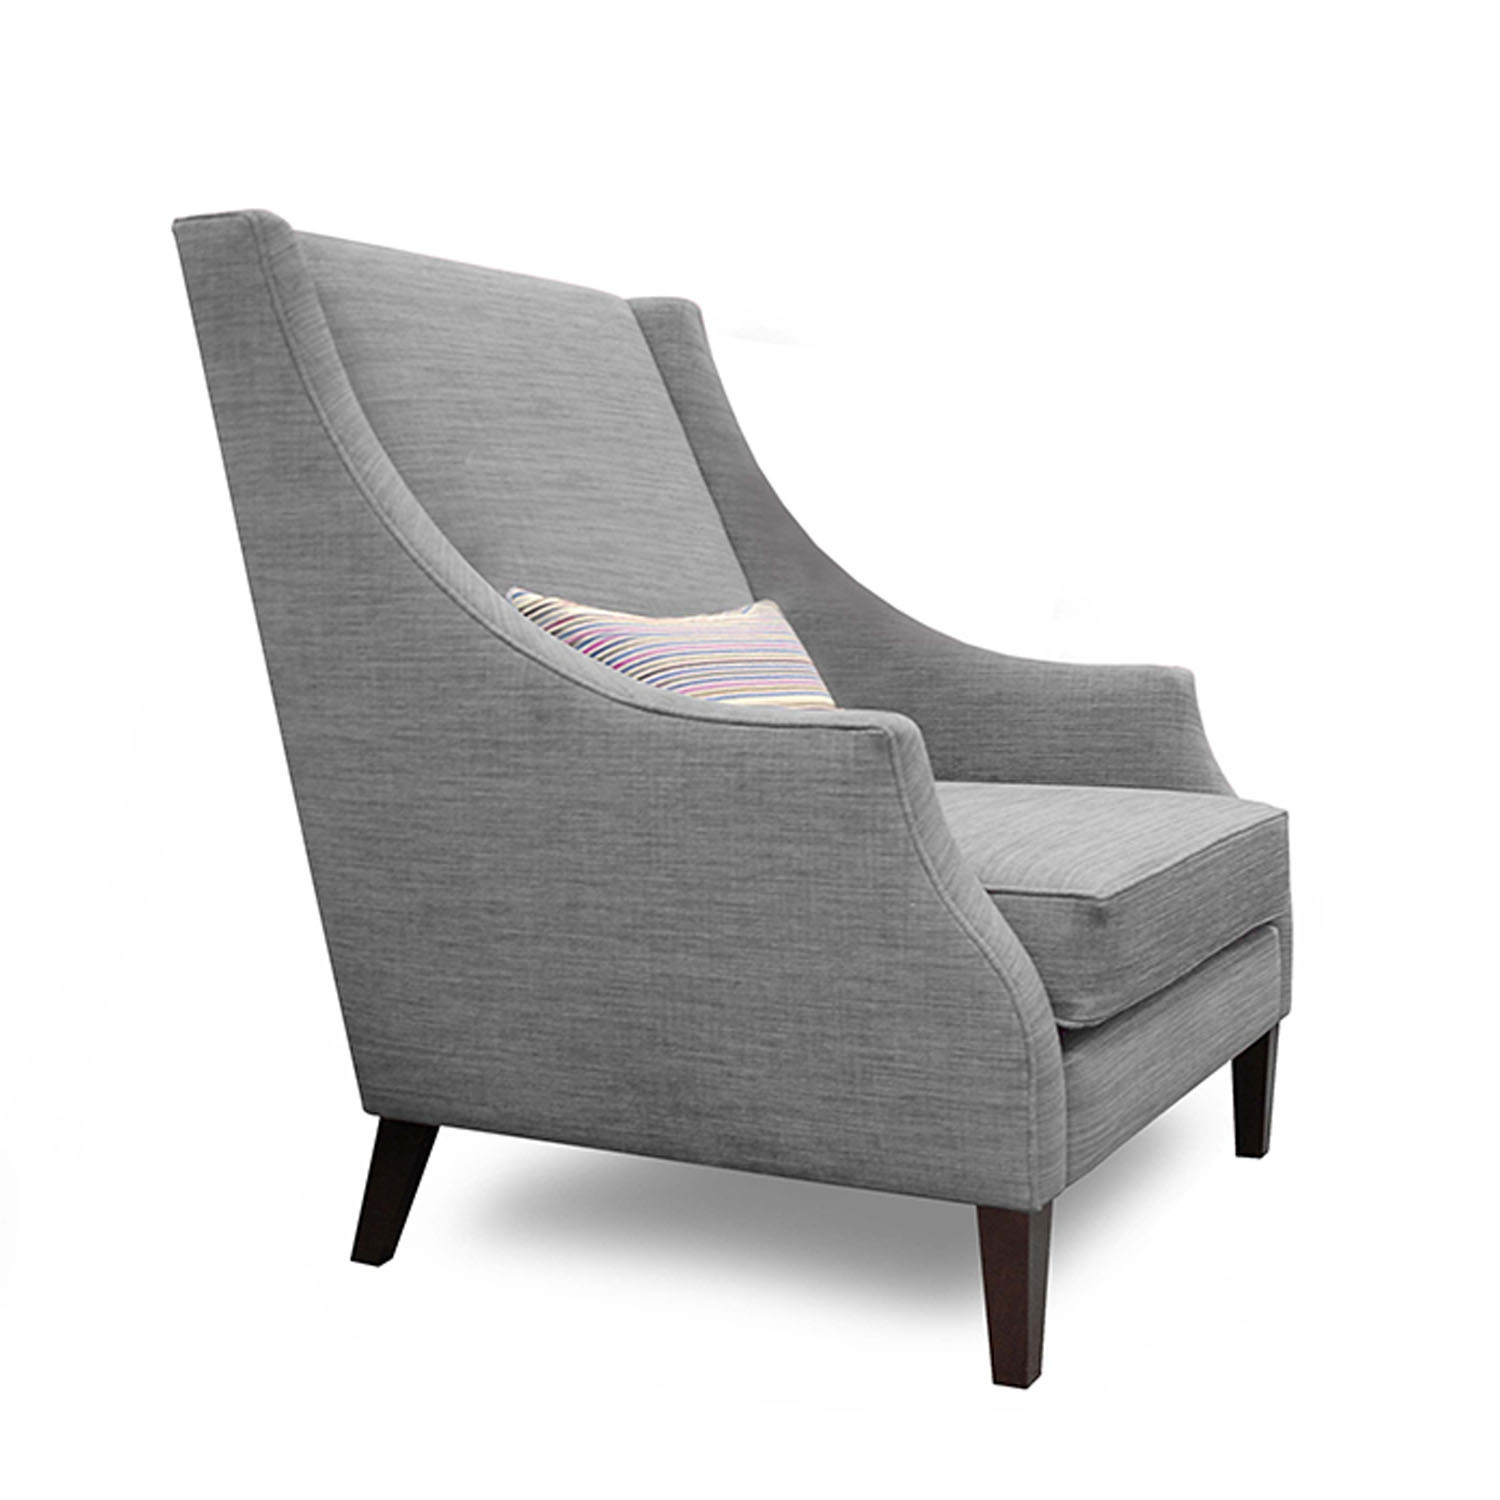 Angel Wingchair with Soft-Filled Seating